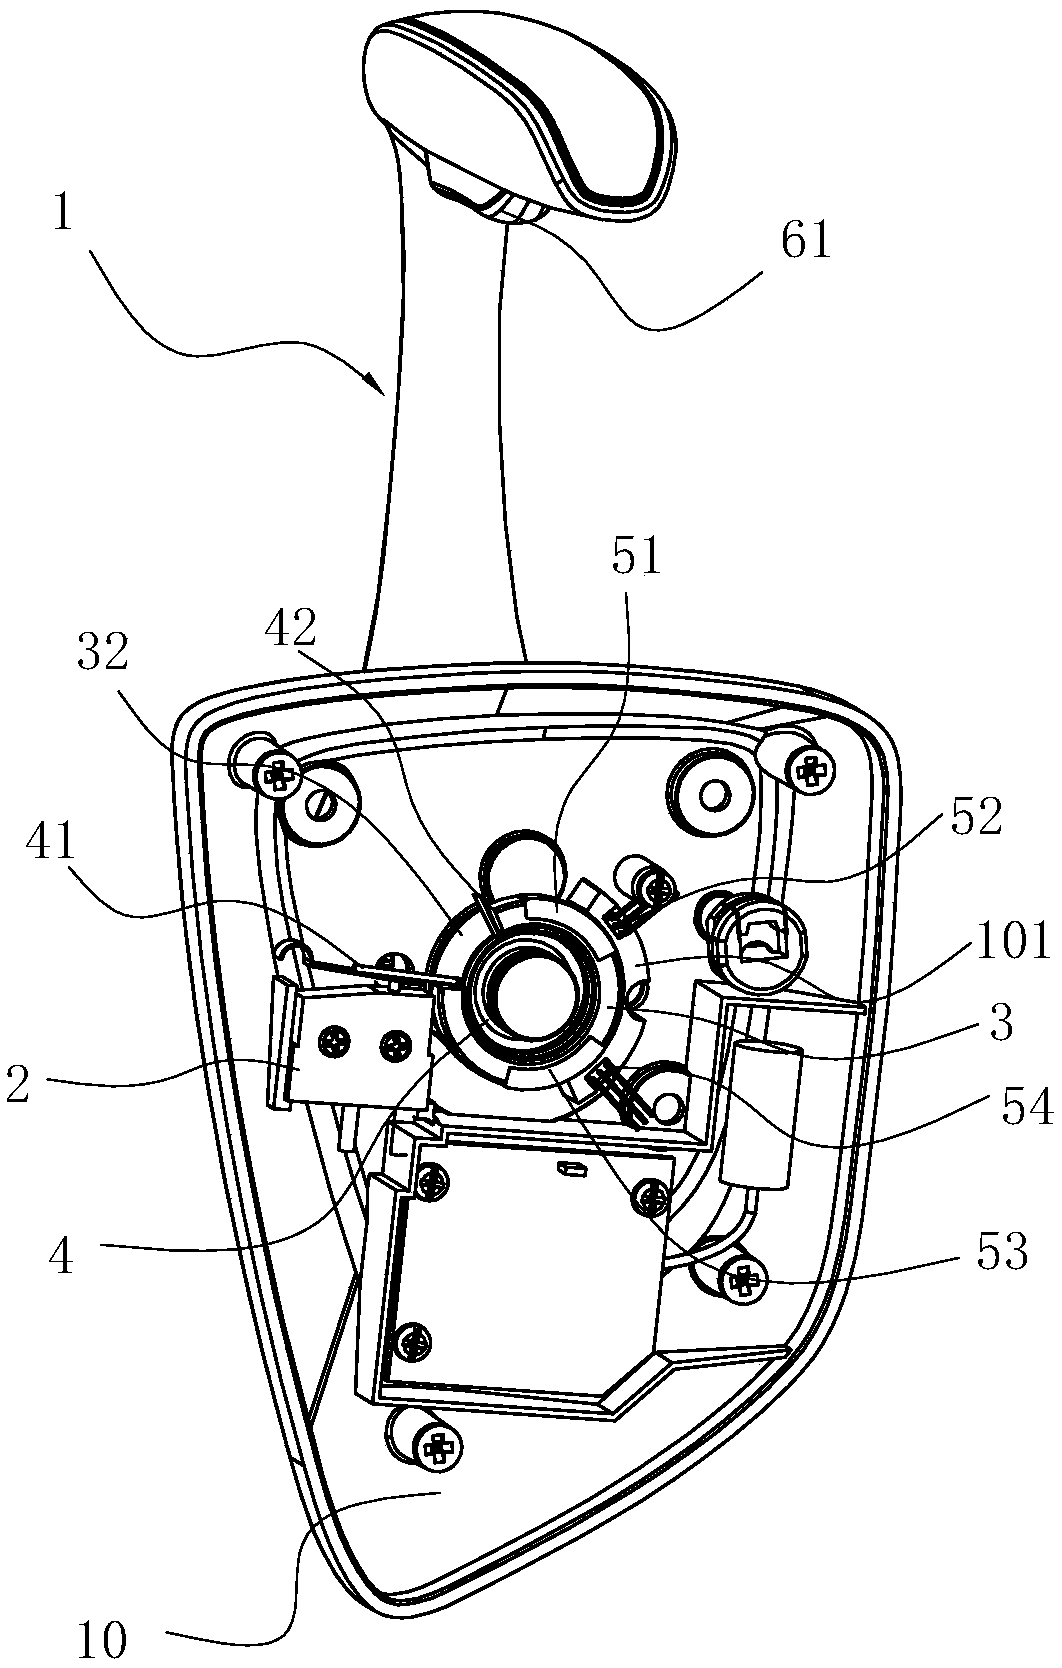 Operating device for marine propeller